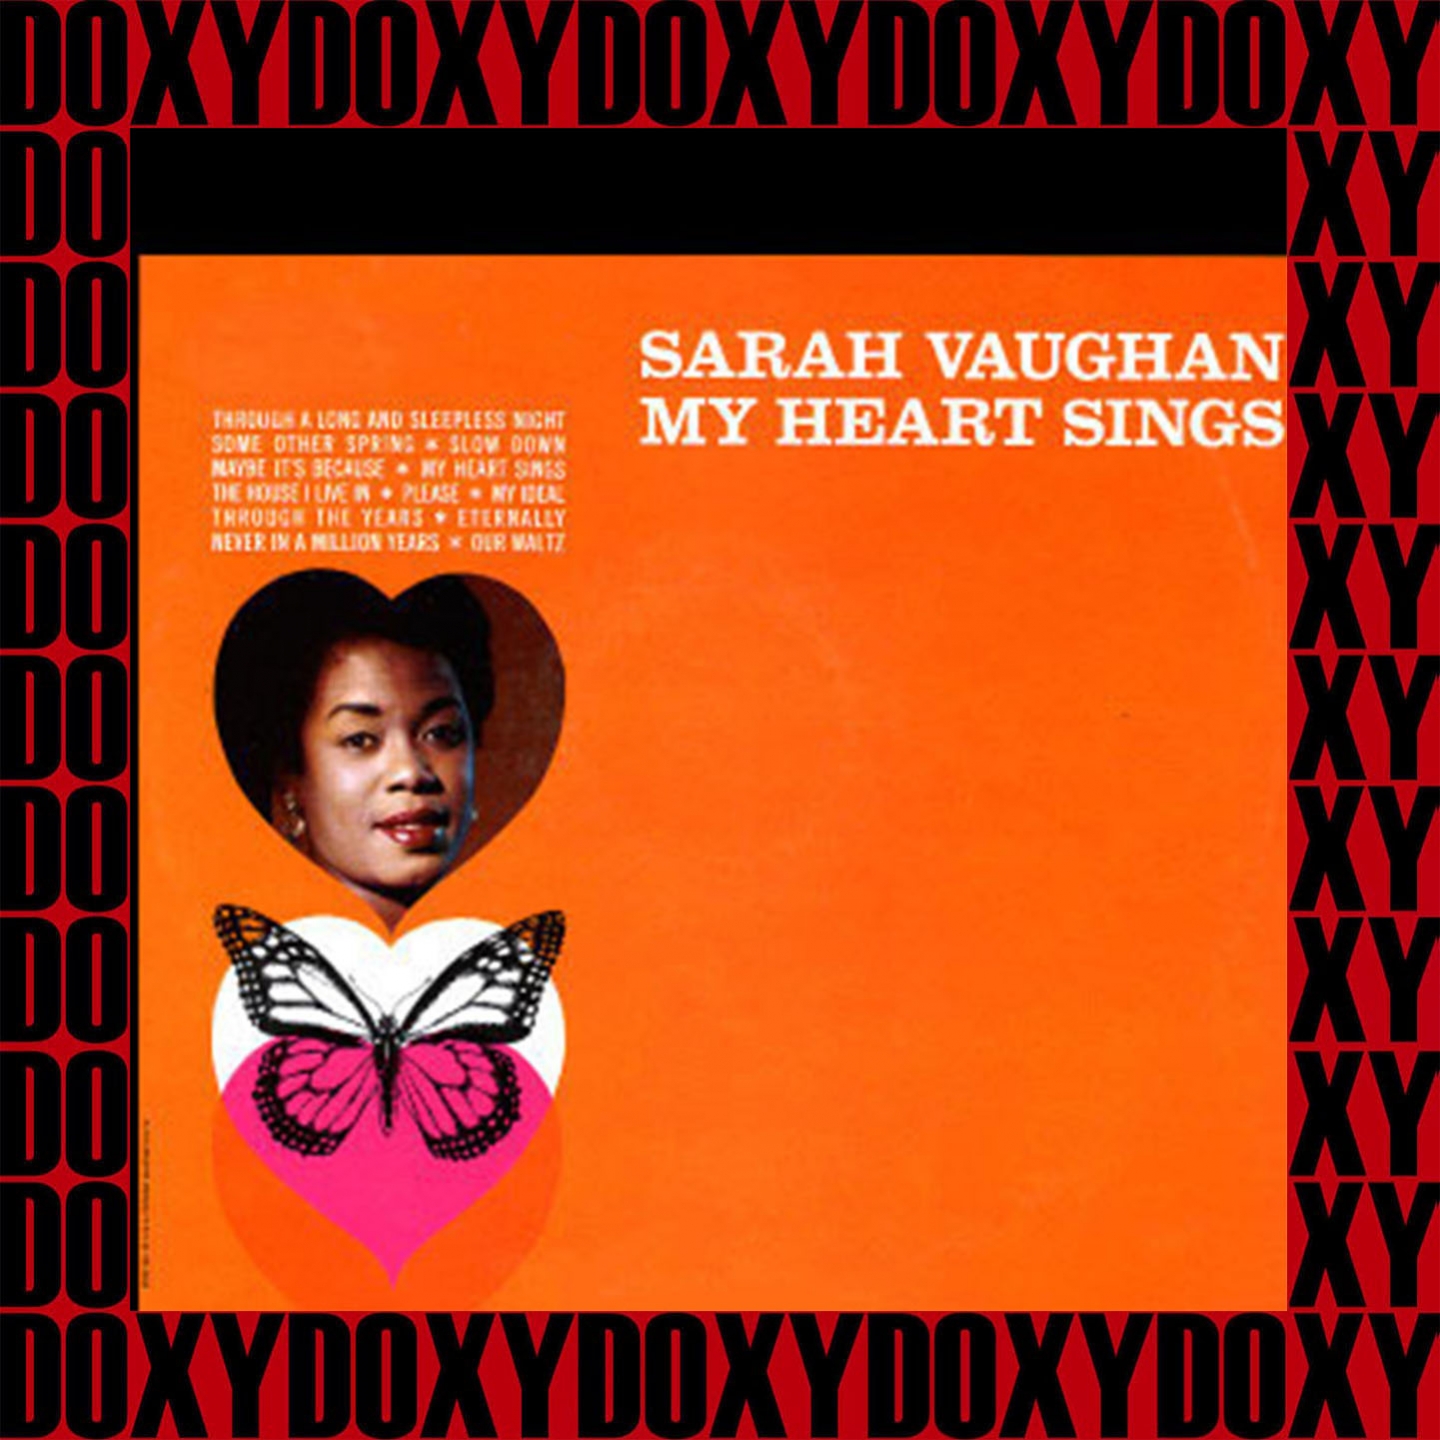 My Heart Sings (Expanded, Remastered Version) (Doxy Collection)